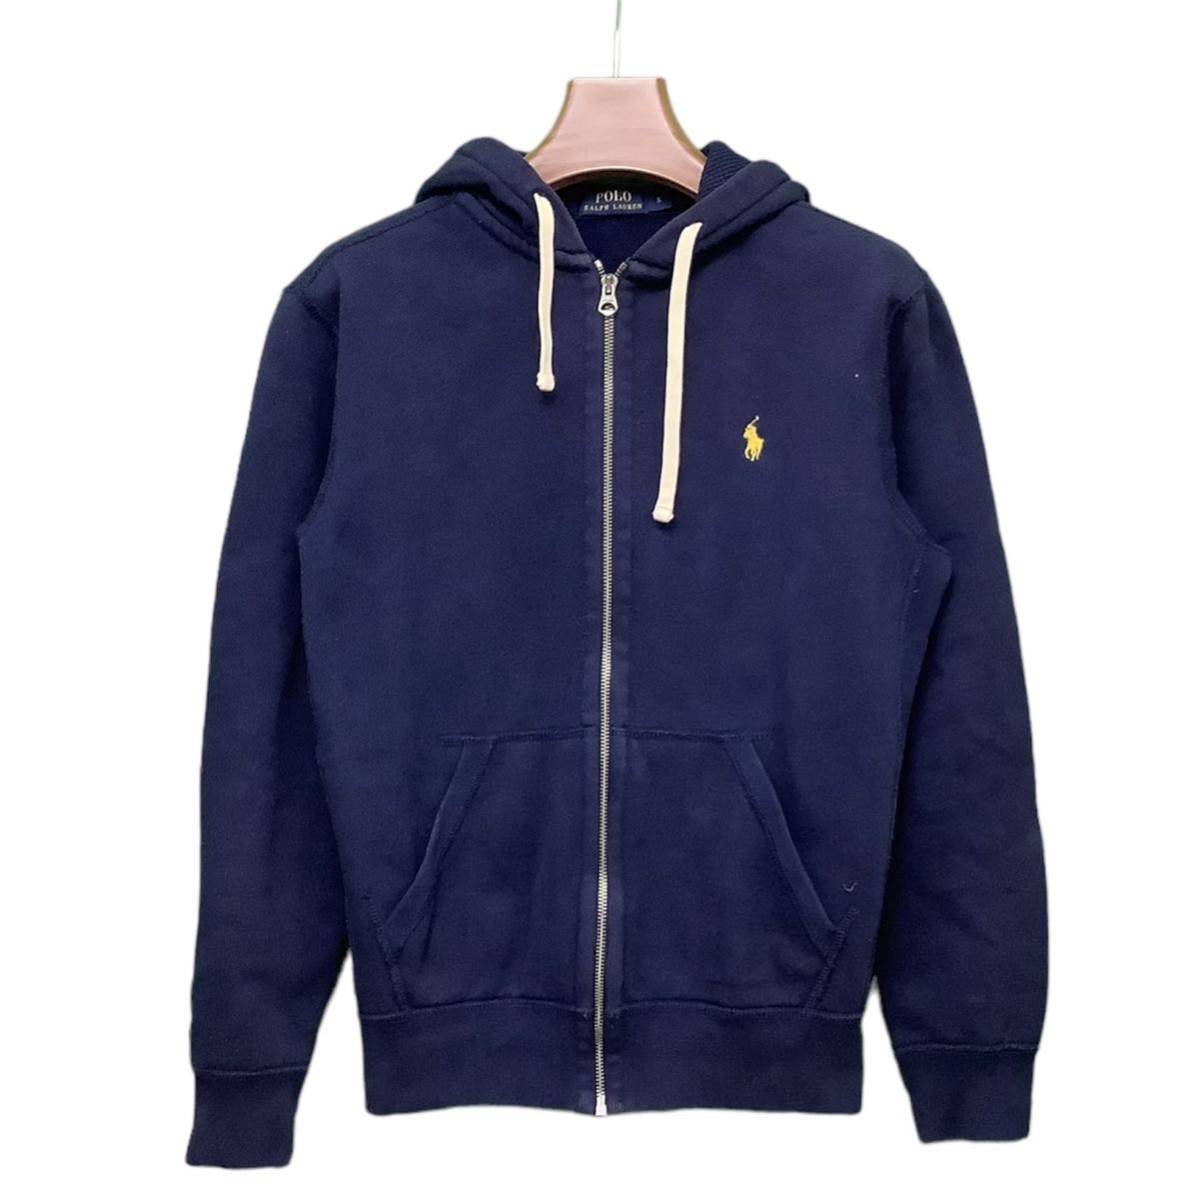 POLO RALPH LAUREN,POLO, Polo Ralph Lauren, Ralph Lauren, Zip up Parker, sweat, hood, old clothes, lady's, S size 